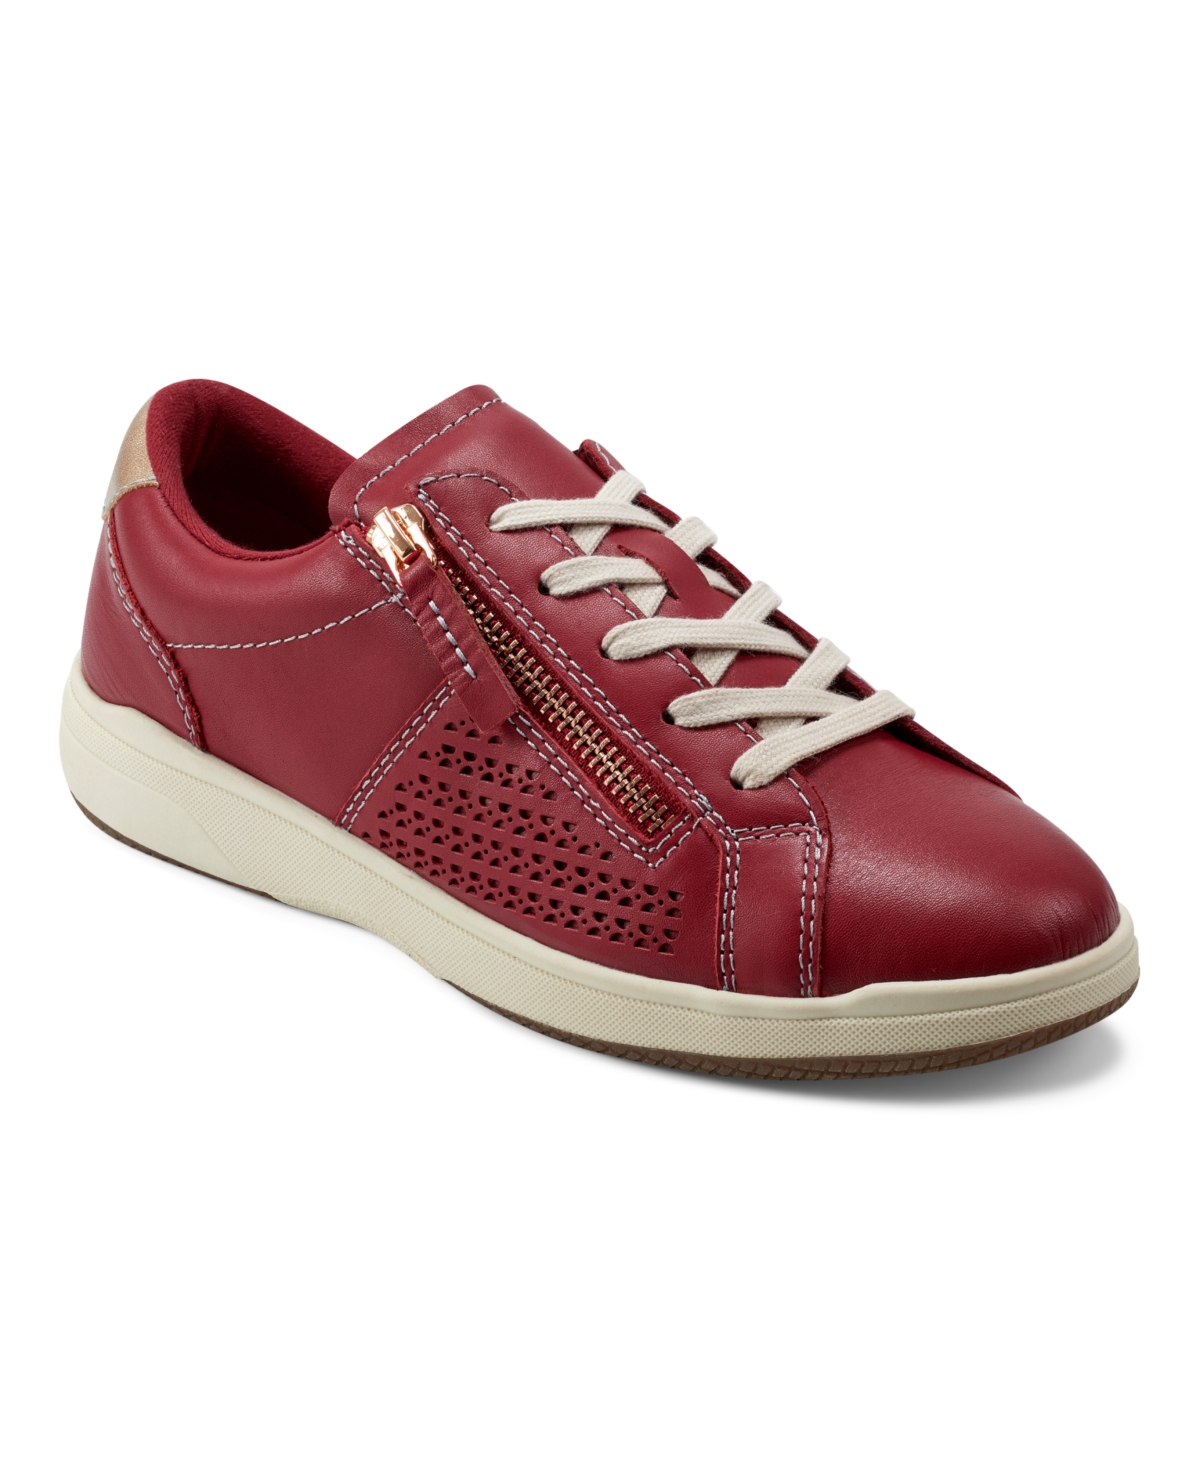 Earth Women's Netta Lace-up Sneakers In Cherry Red Leather